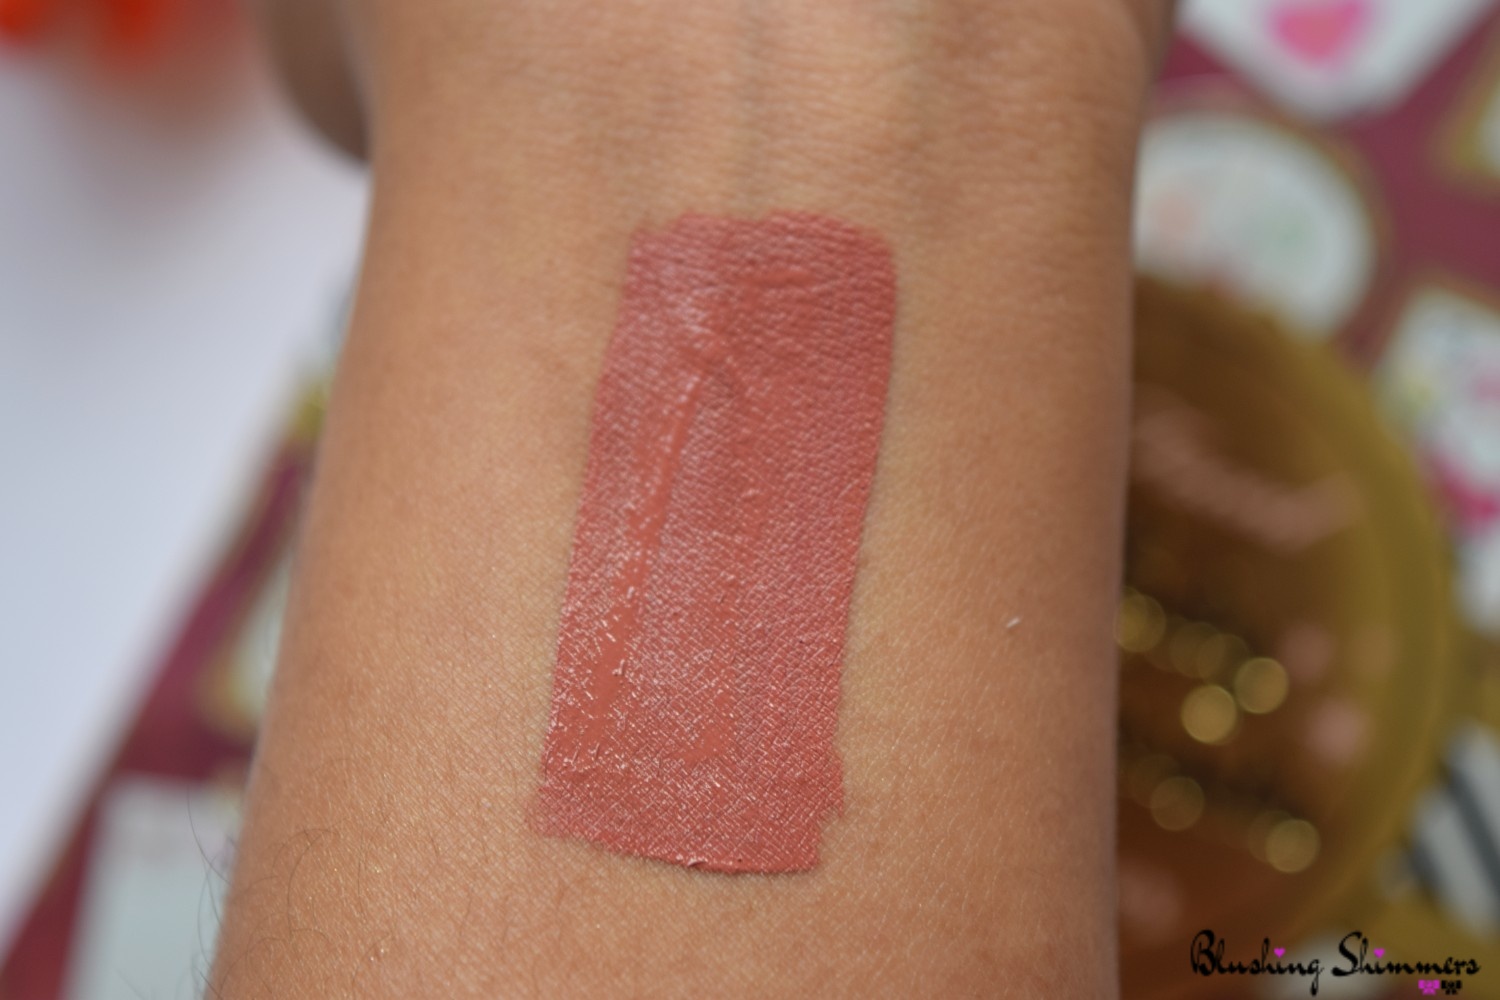 Too Faced Melted Matte Lipstick in Sell Out swatches